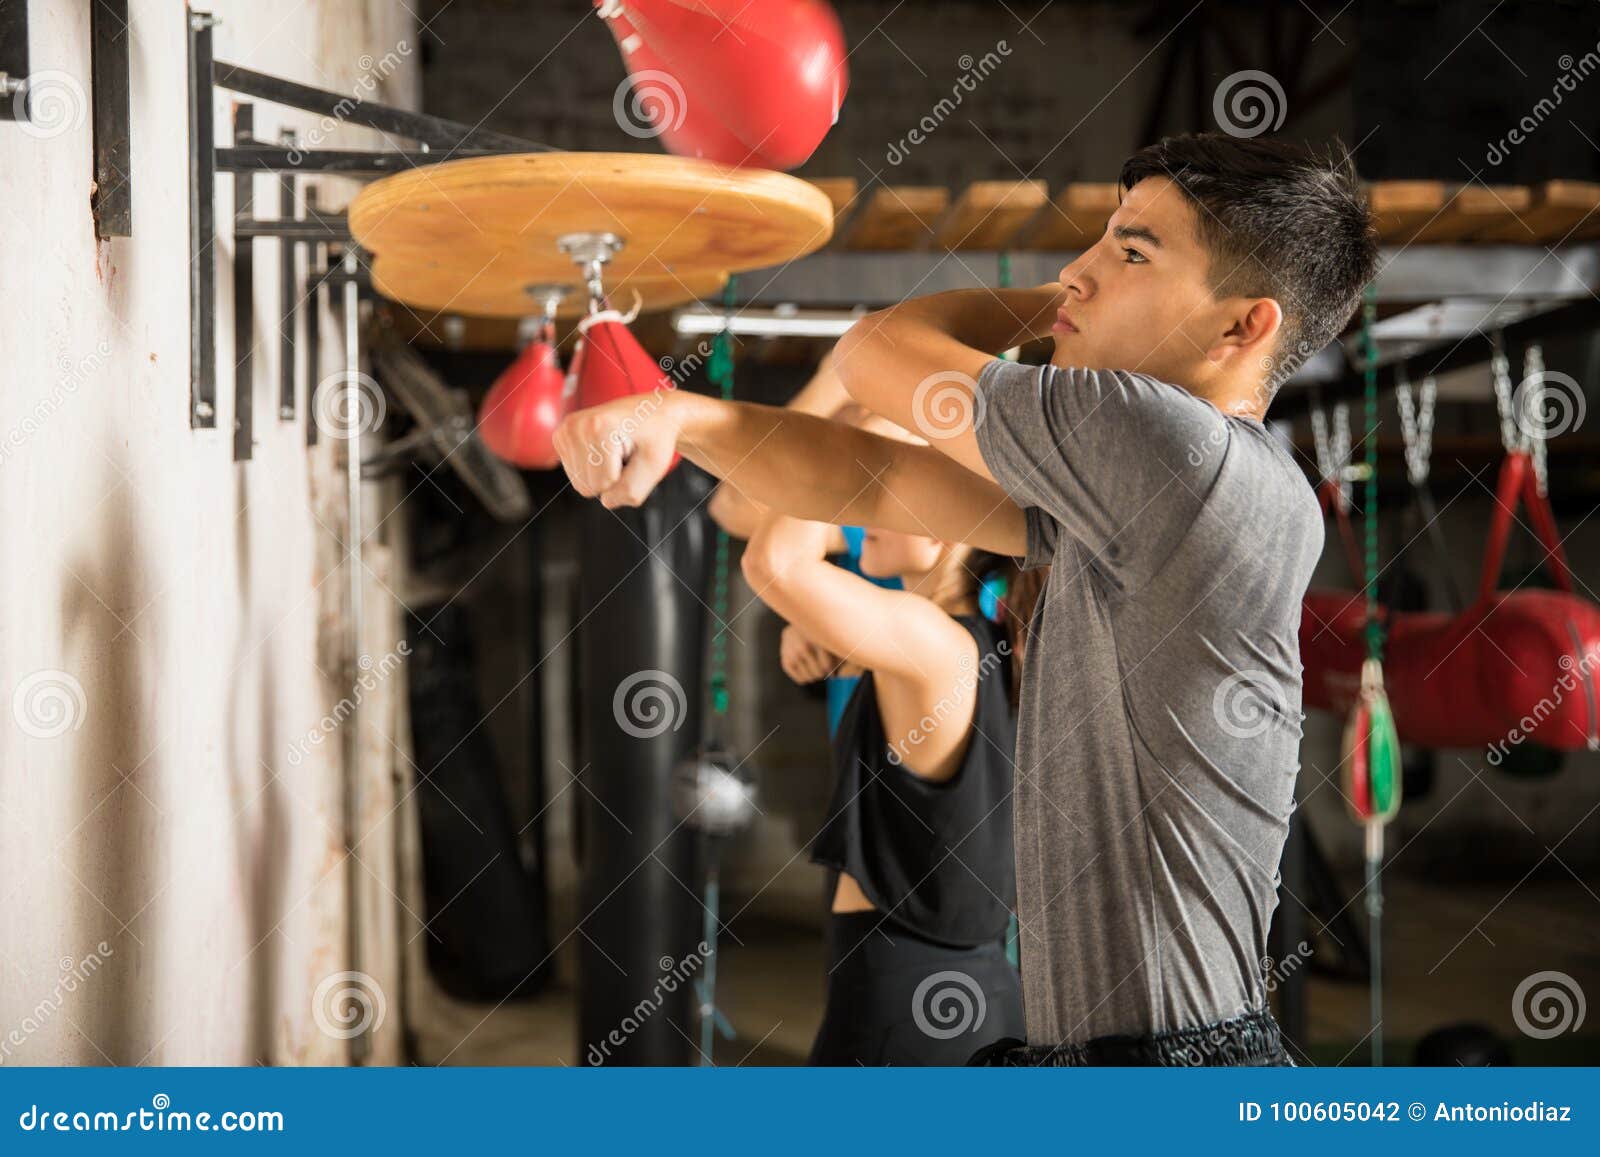 Group Of People Using Speed Bag Stock Photo - Image of sport, latin: 100605042